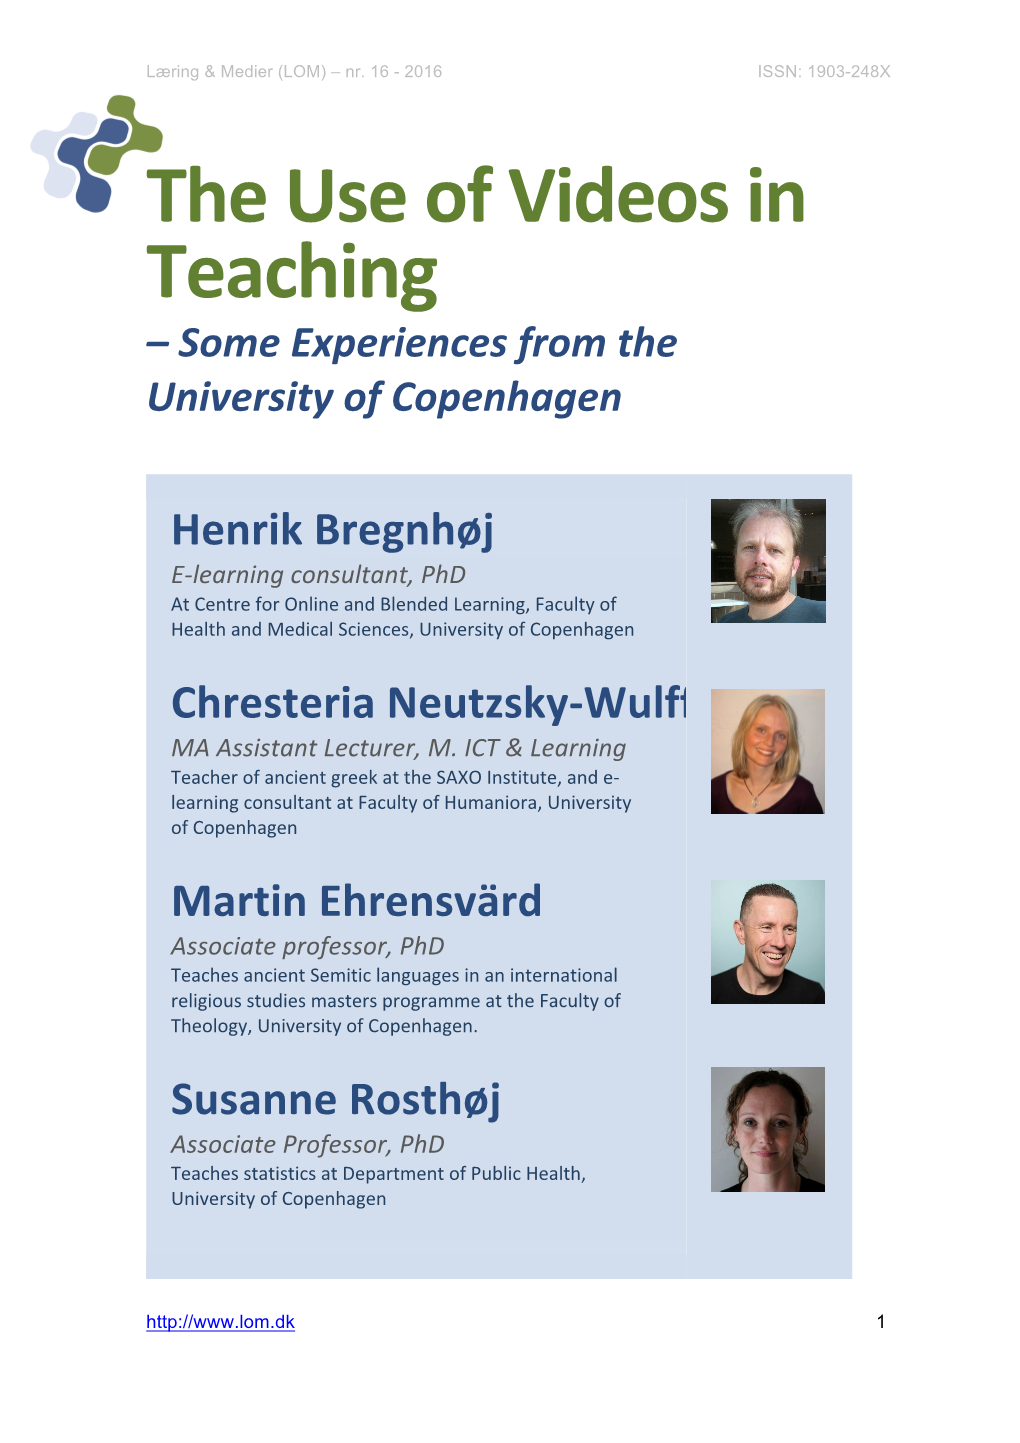 The Use of Videos in Teaching – Some Experiences from the University of Copenhagen